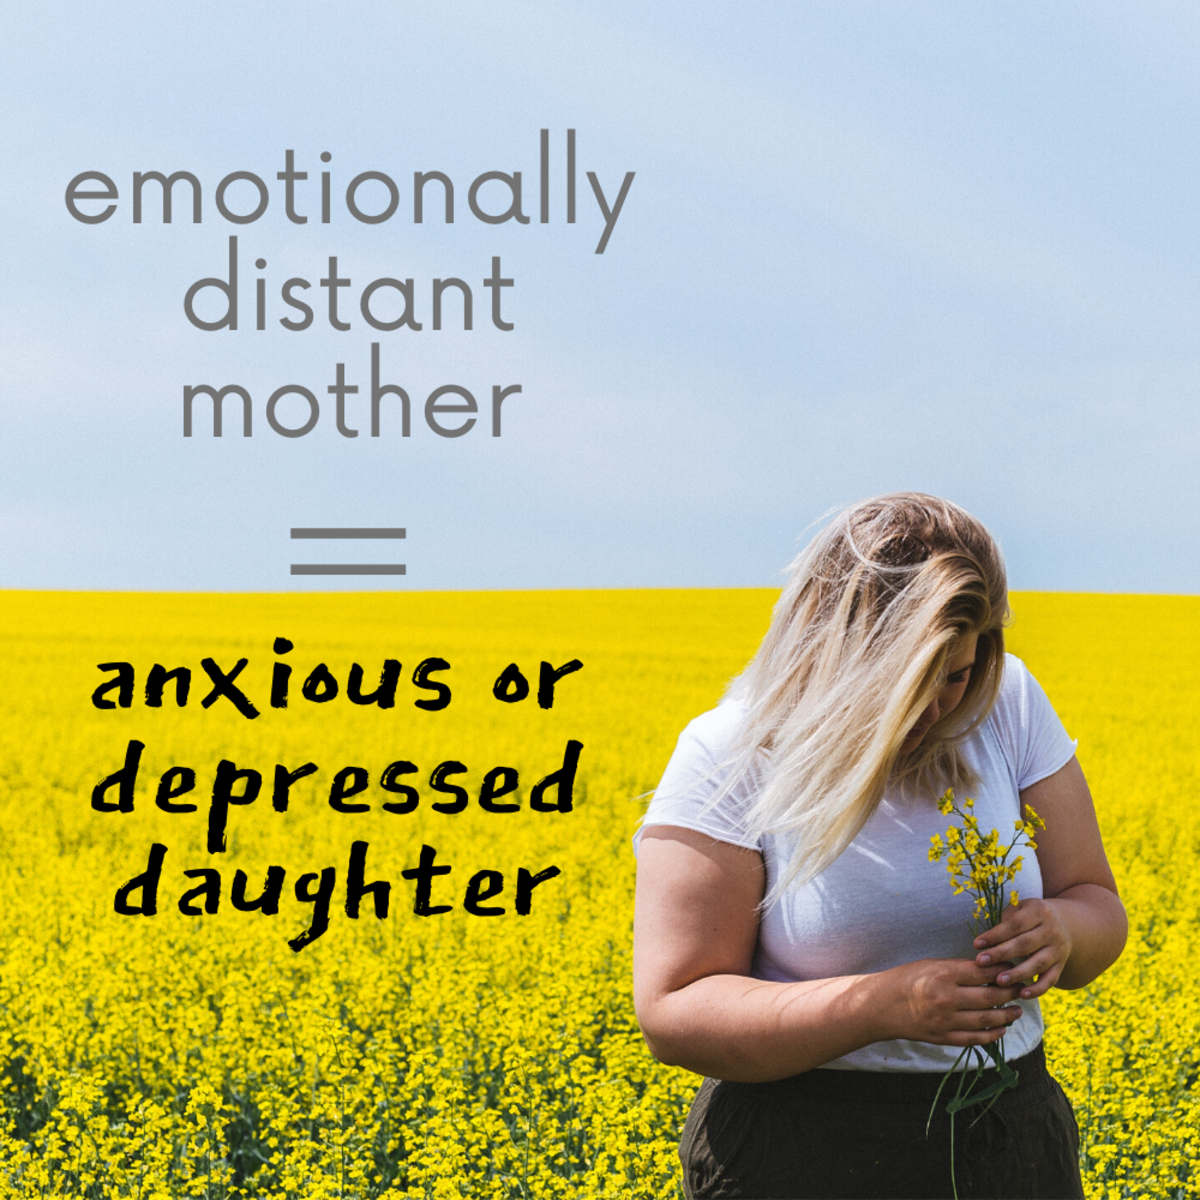 learn-7-ways-to-survive-an-emotionally-absent-mother-and-lead-a-joyful-life